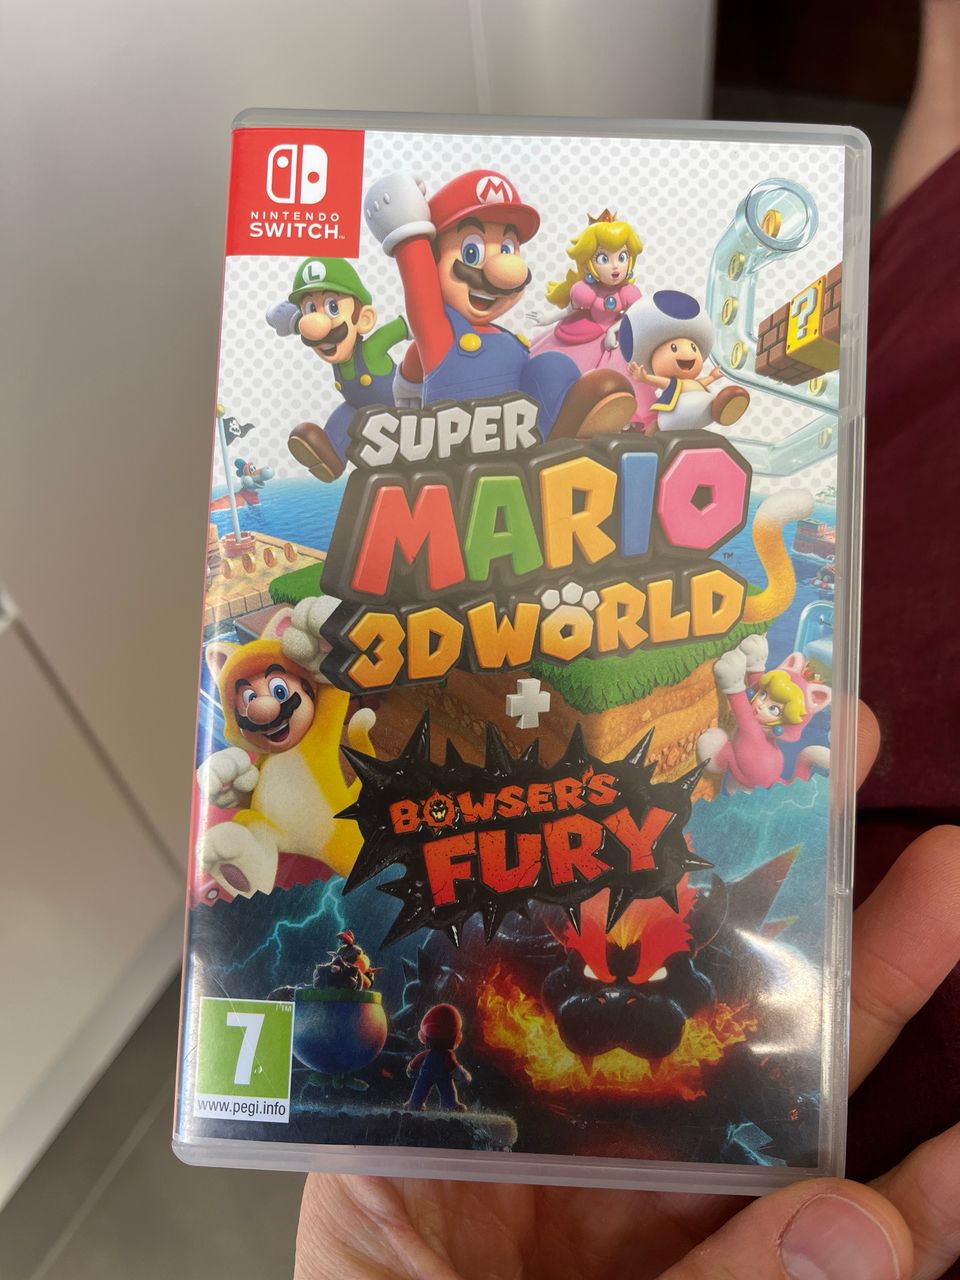 Super Mario 3D world + Browsers Fury